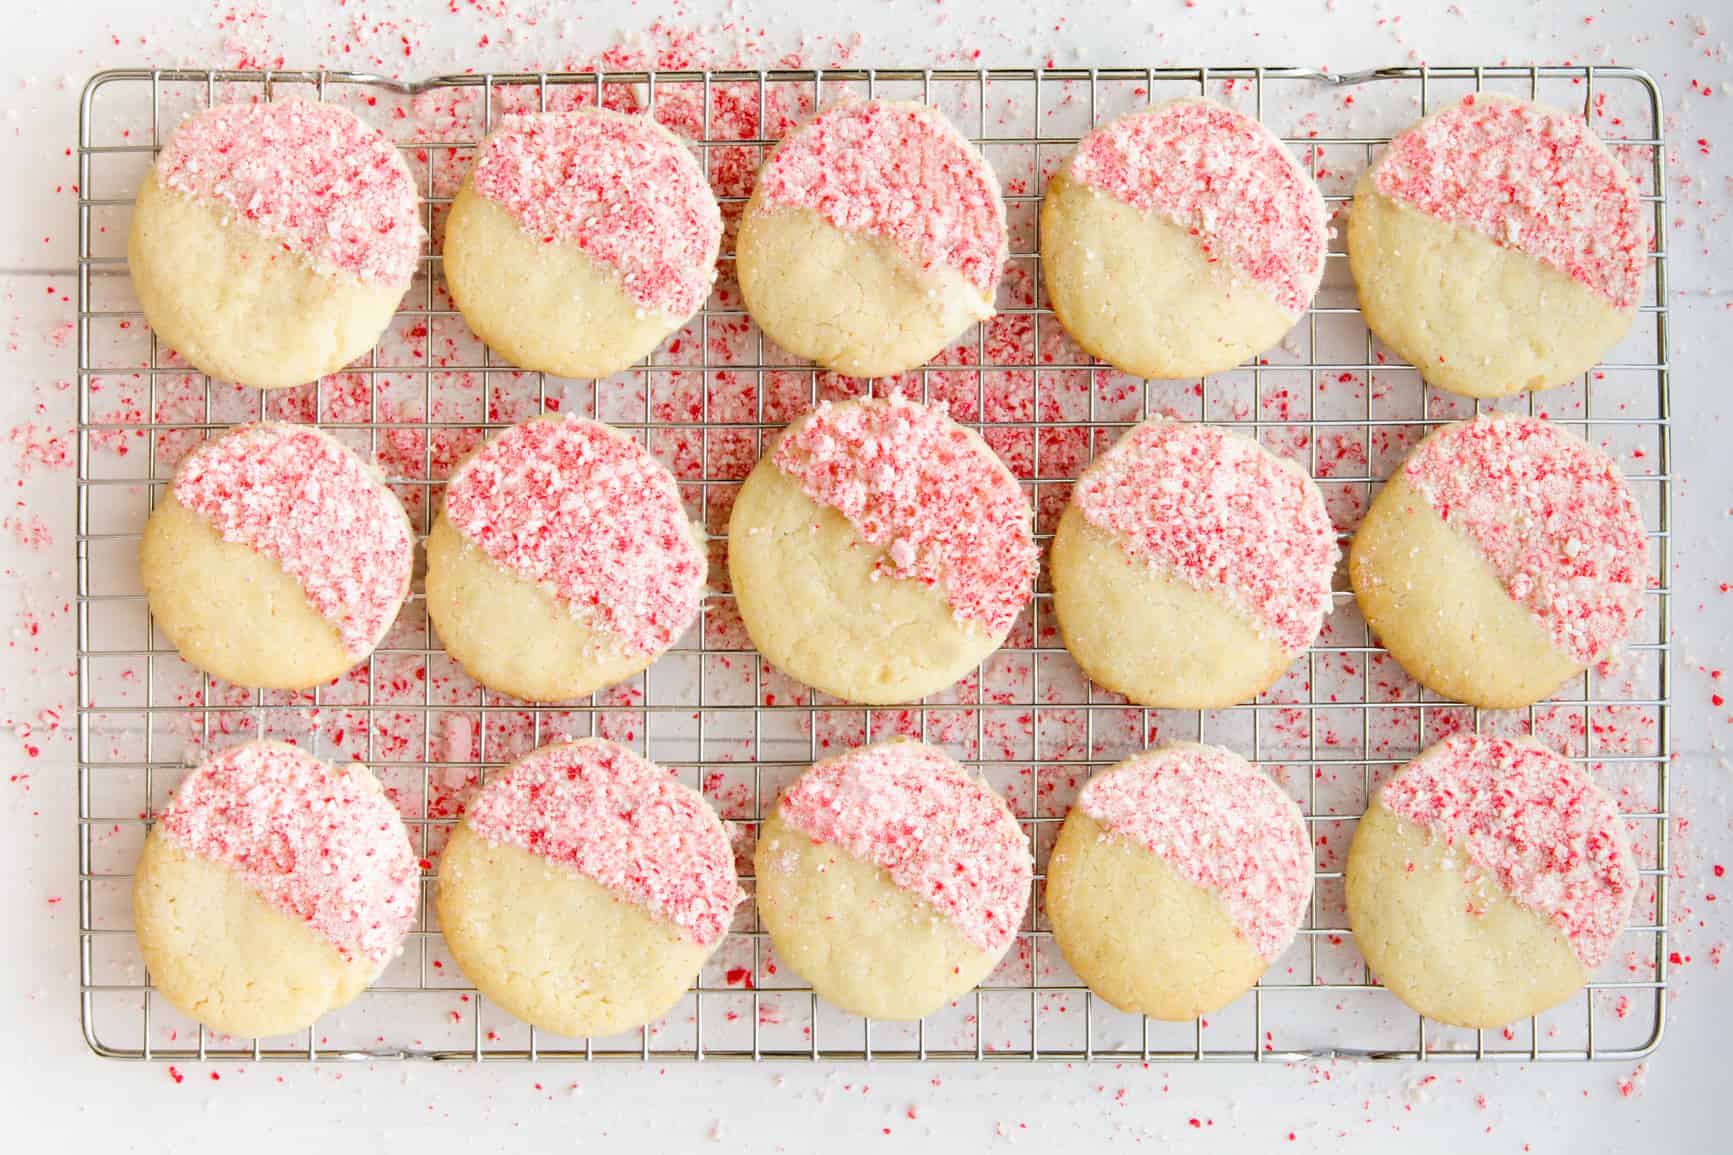 Looking for Thanksgiving or Christmas cookie recipe ideas? These white chocolate dipped Peppermint Crunch Sugar Cookies should be added to your holiday baking or cookie exchange list. They are so simple and delicious, and will help make the holidays even more magical for your guests. Click here for the recipe.